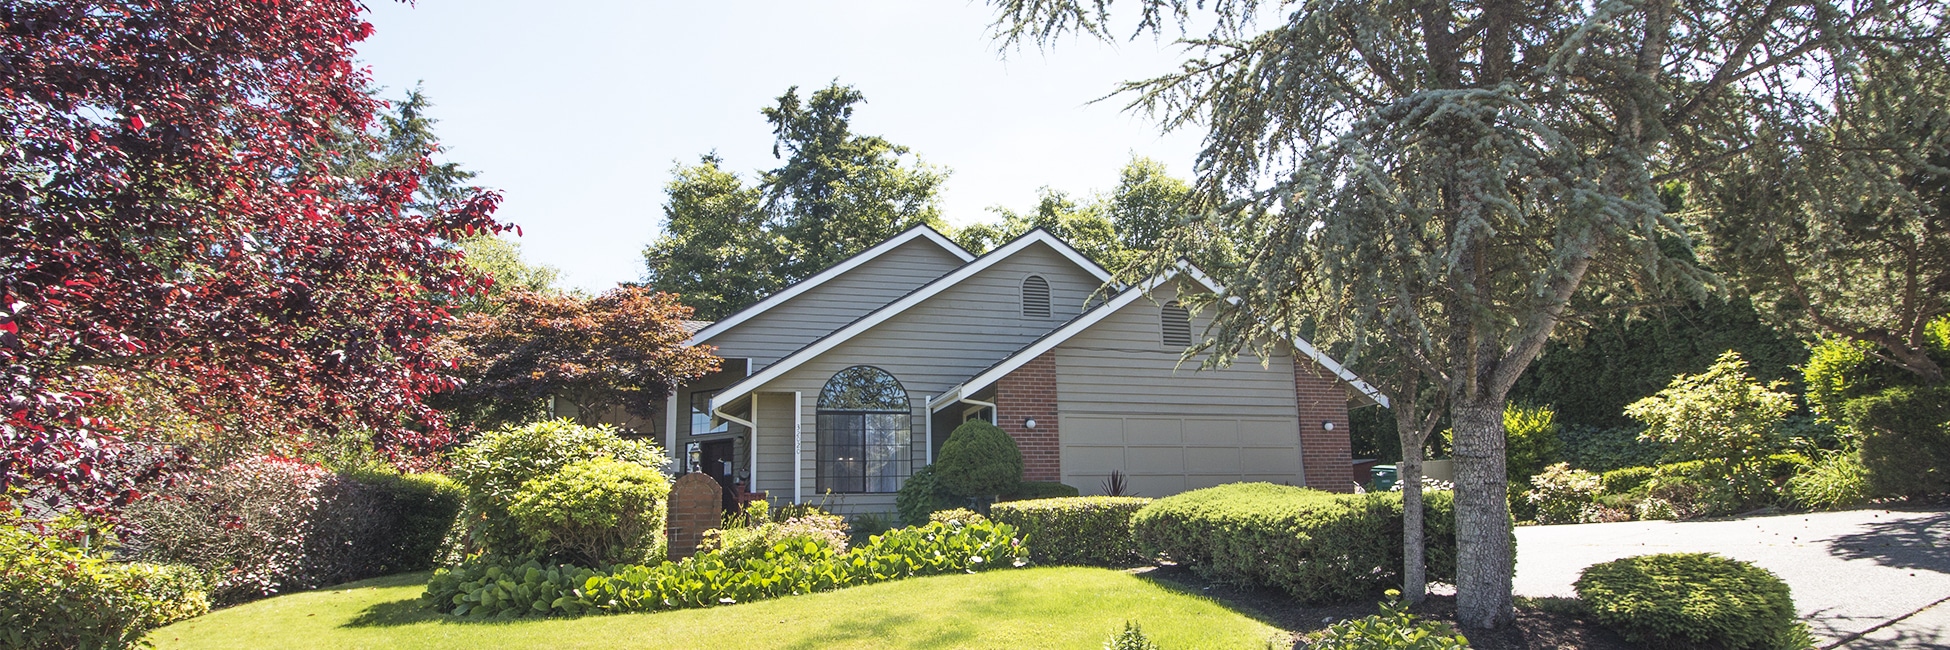 Federal Way Adult Family Home